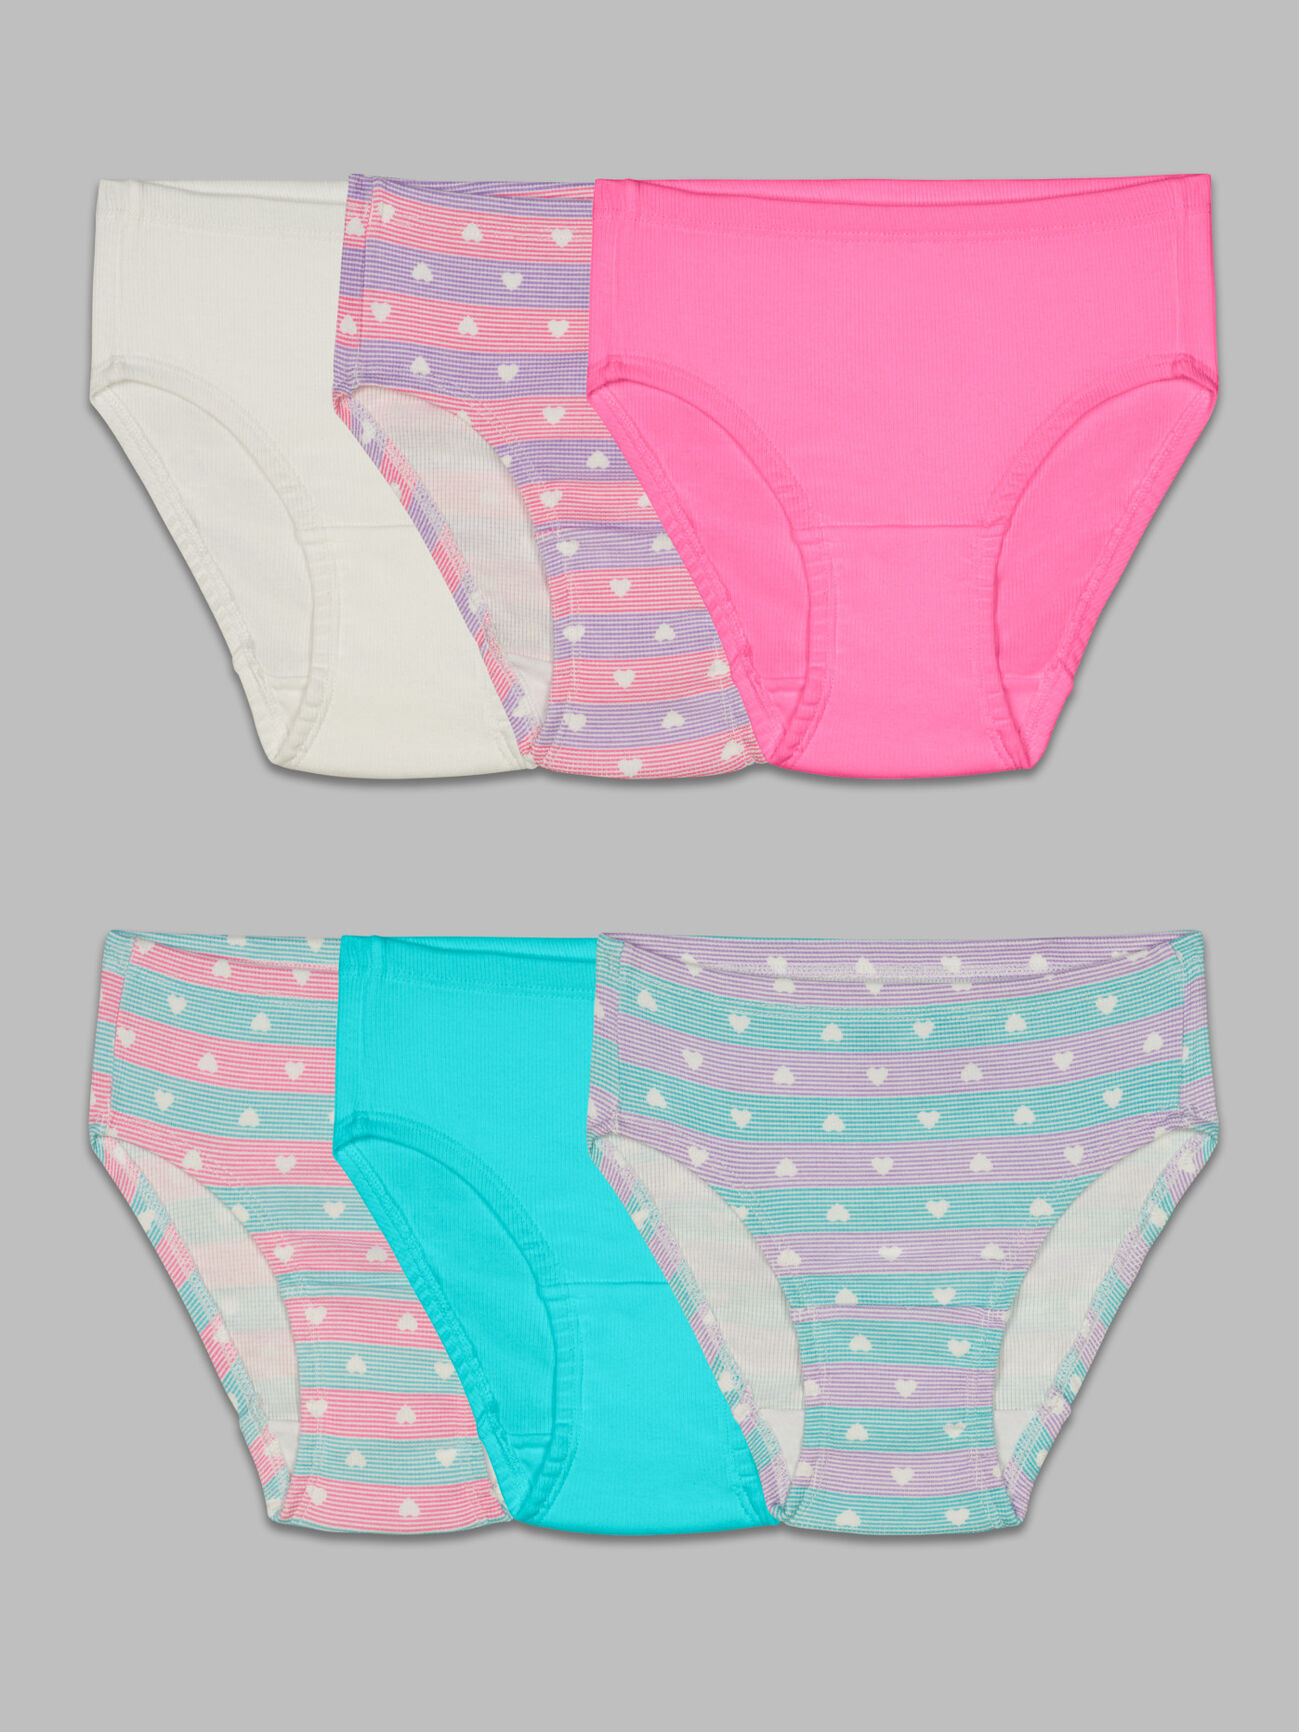 Toddler Girls' Assorted Flexible Fit Briefs, 6 Pack